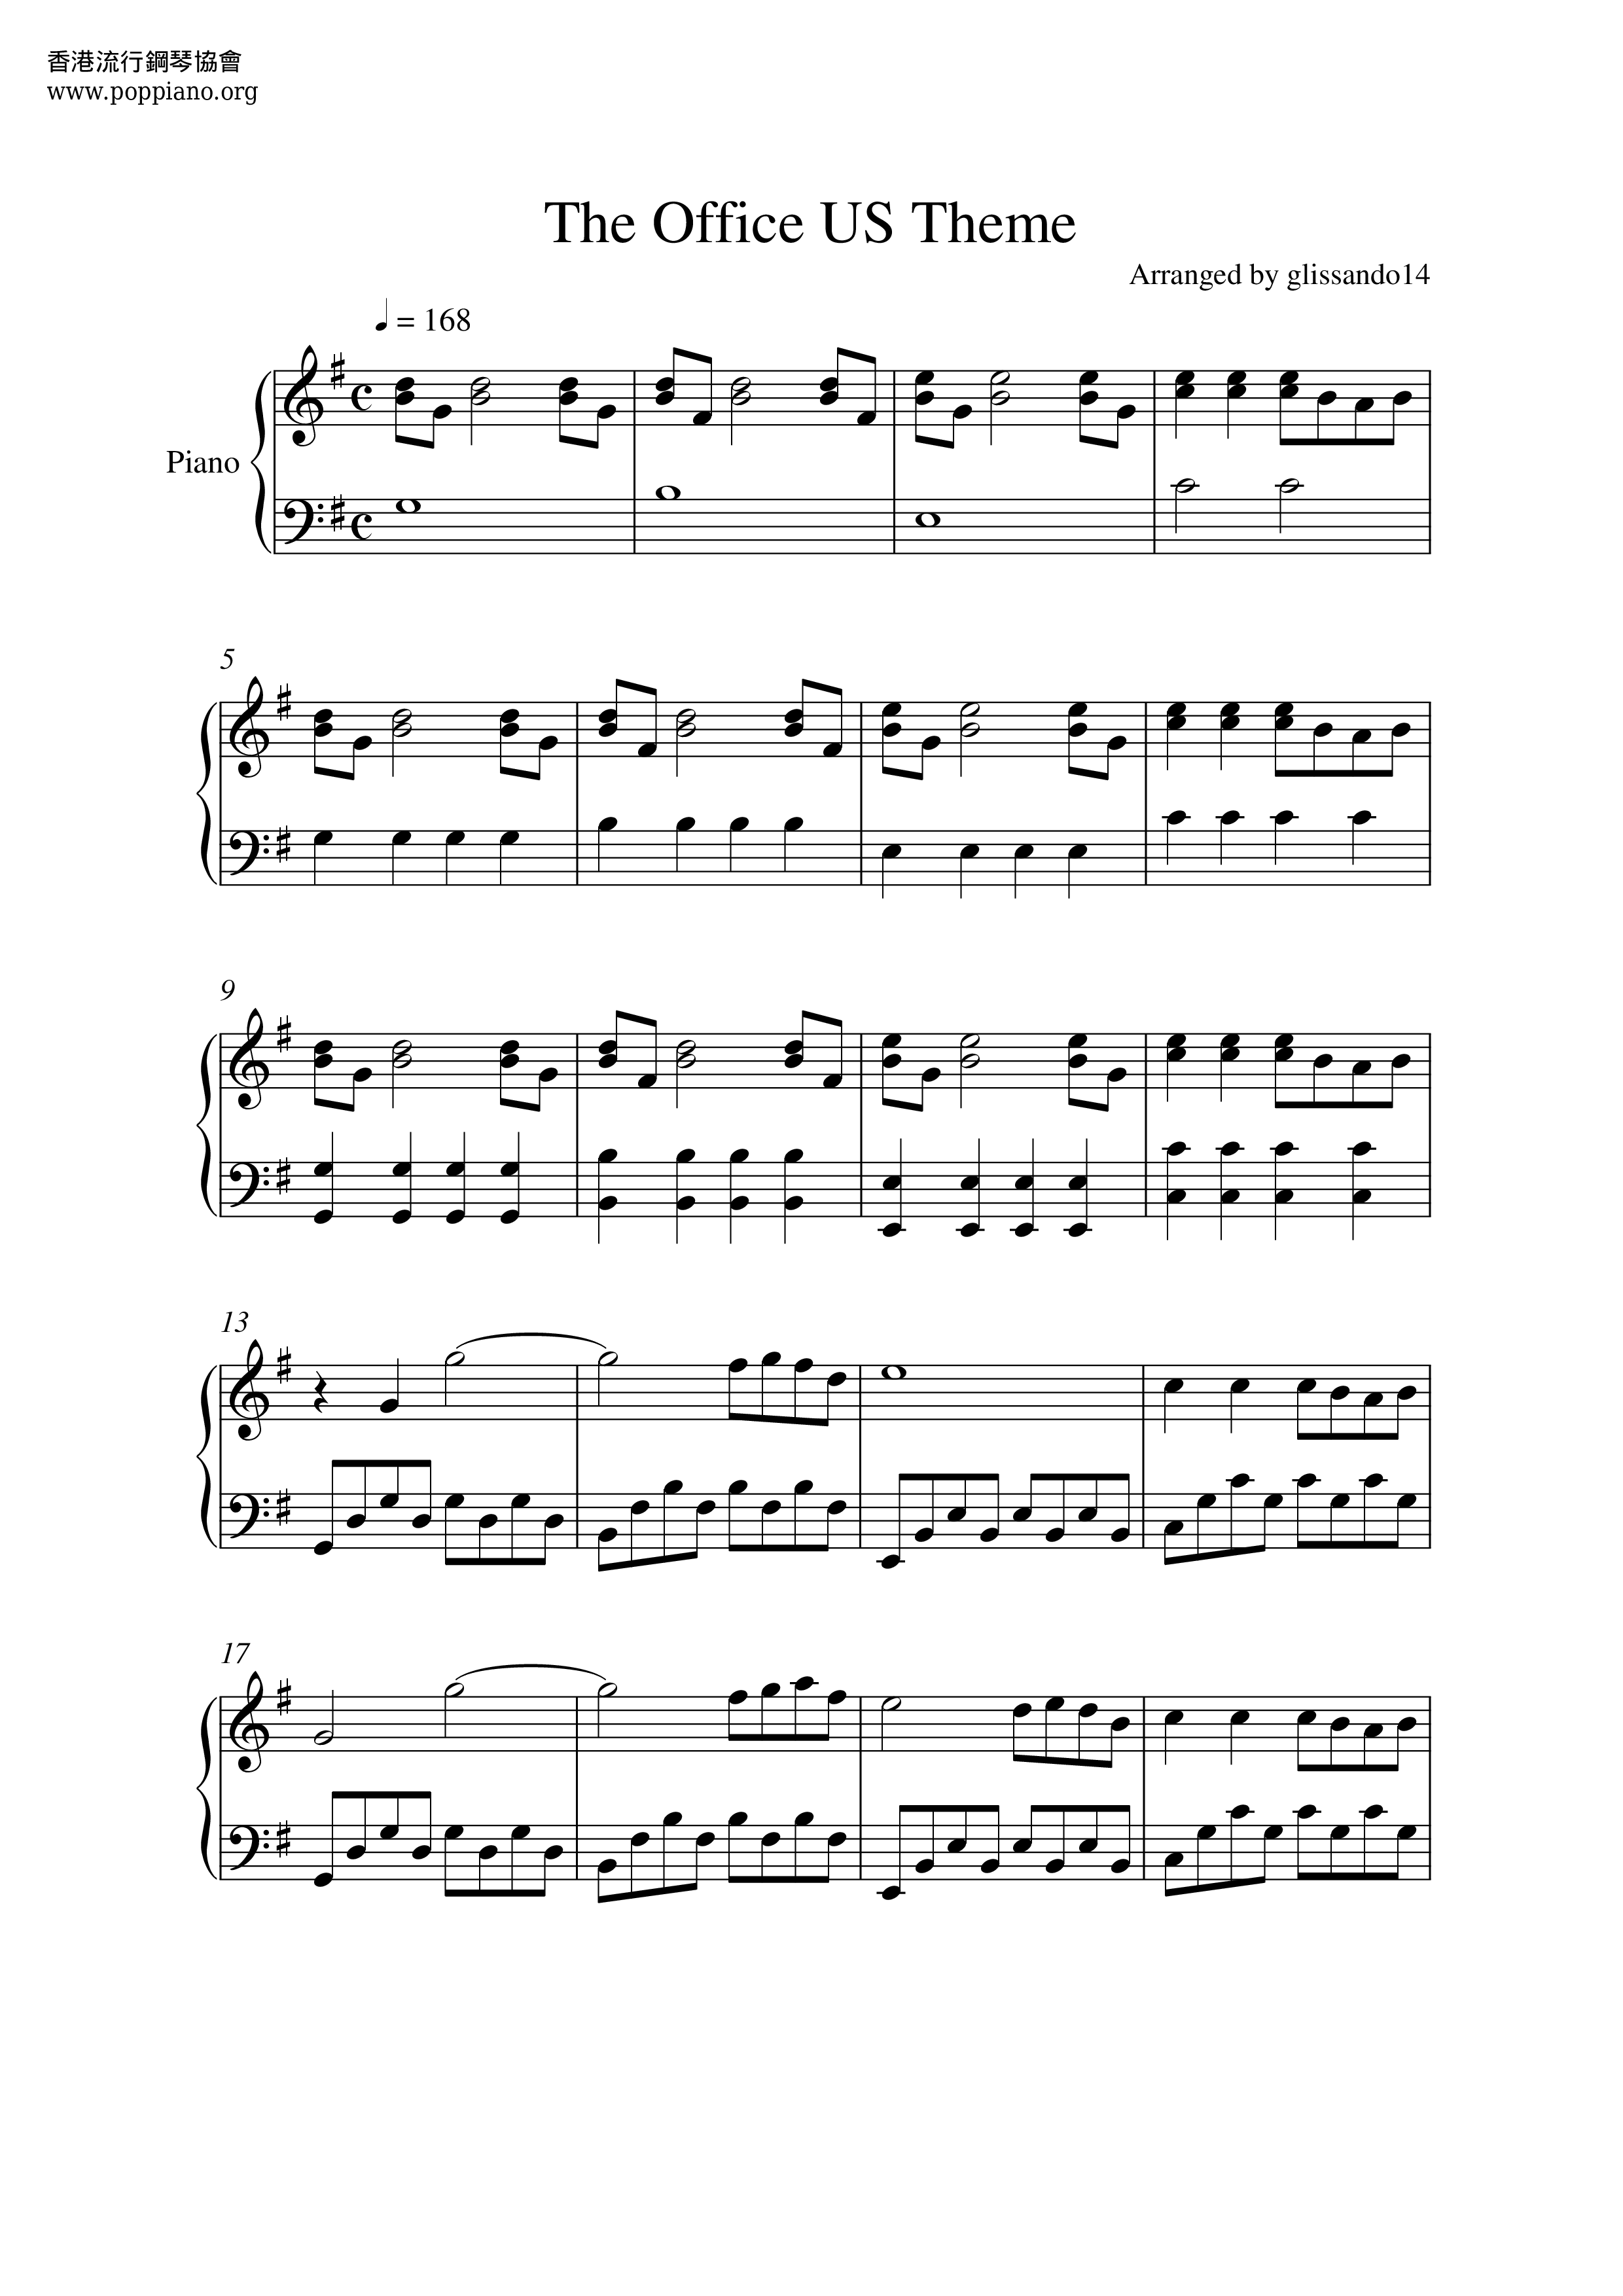 ☆ TV song-The Office Theme Sheet Music pdf, - Free Score Download ☆